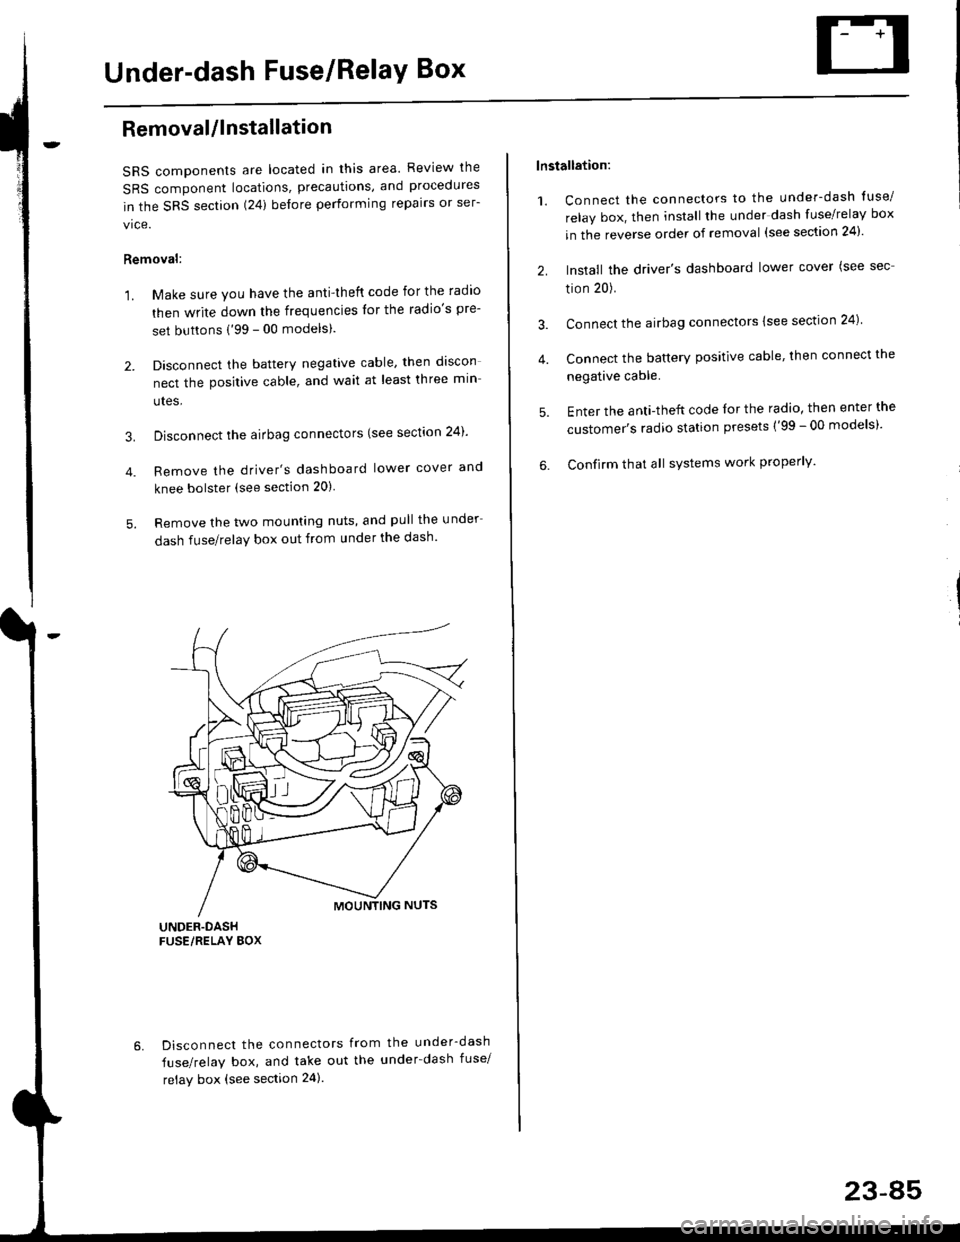 HONDA CIVIC 1998 6.G Workshop Manual Under-dash Fuse/RelaY Box
Removal/lnstallation
SRS components are located in this area. Review lhe
SRS component locations, precautions, and procedures
in the SRS section (24) before performing repair